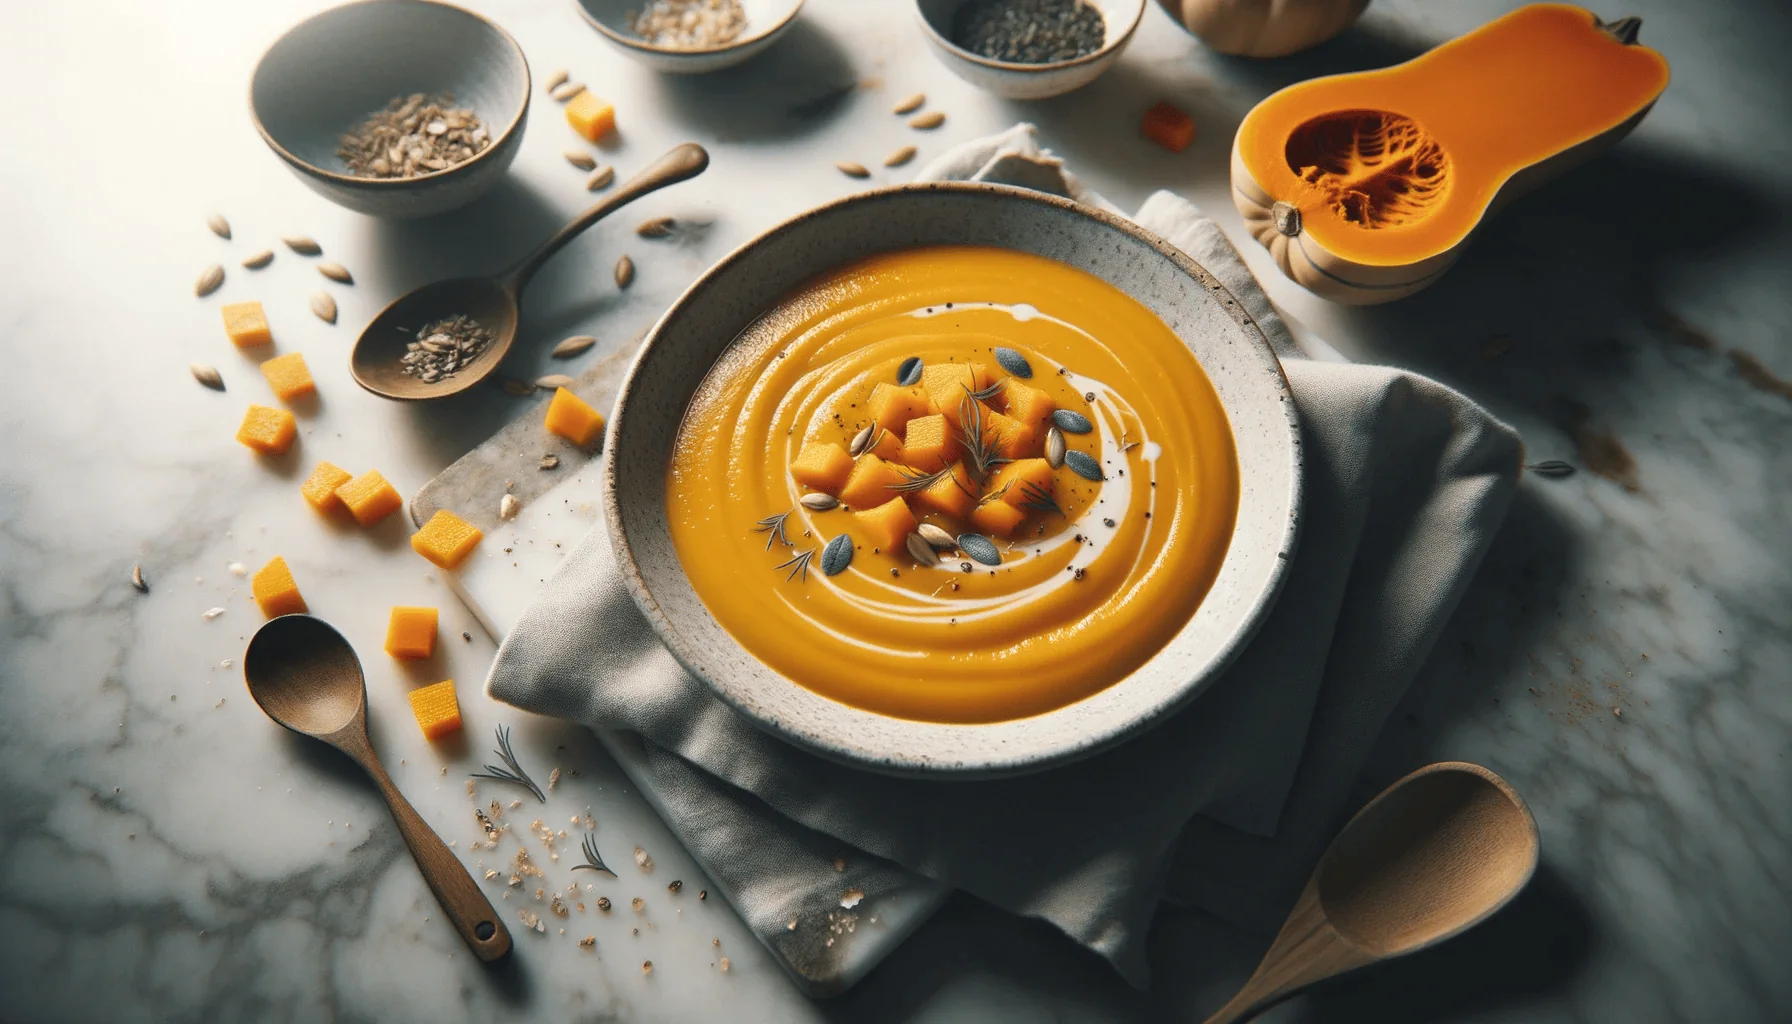 My simple butternut squash soup, ready to serve!